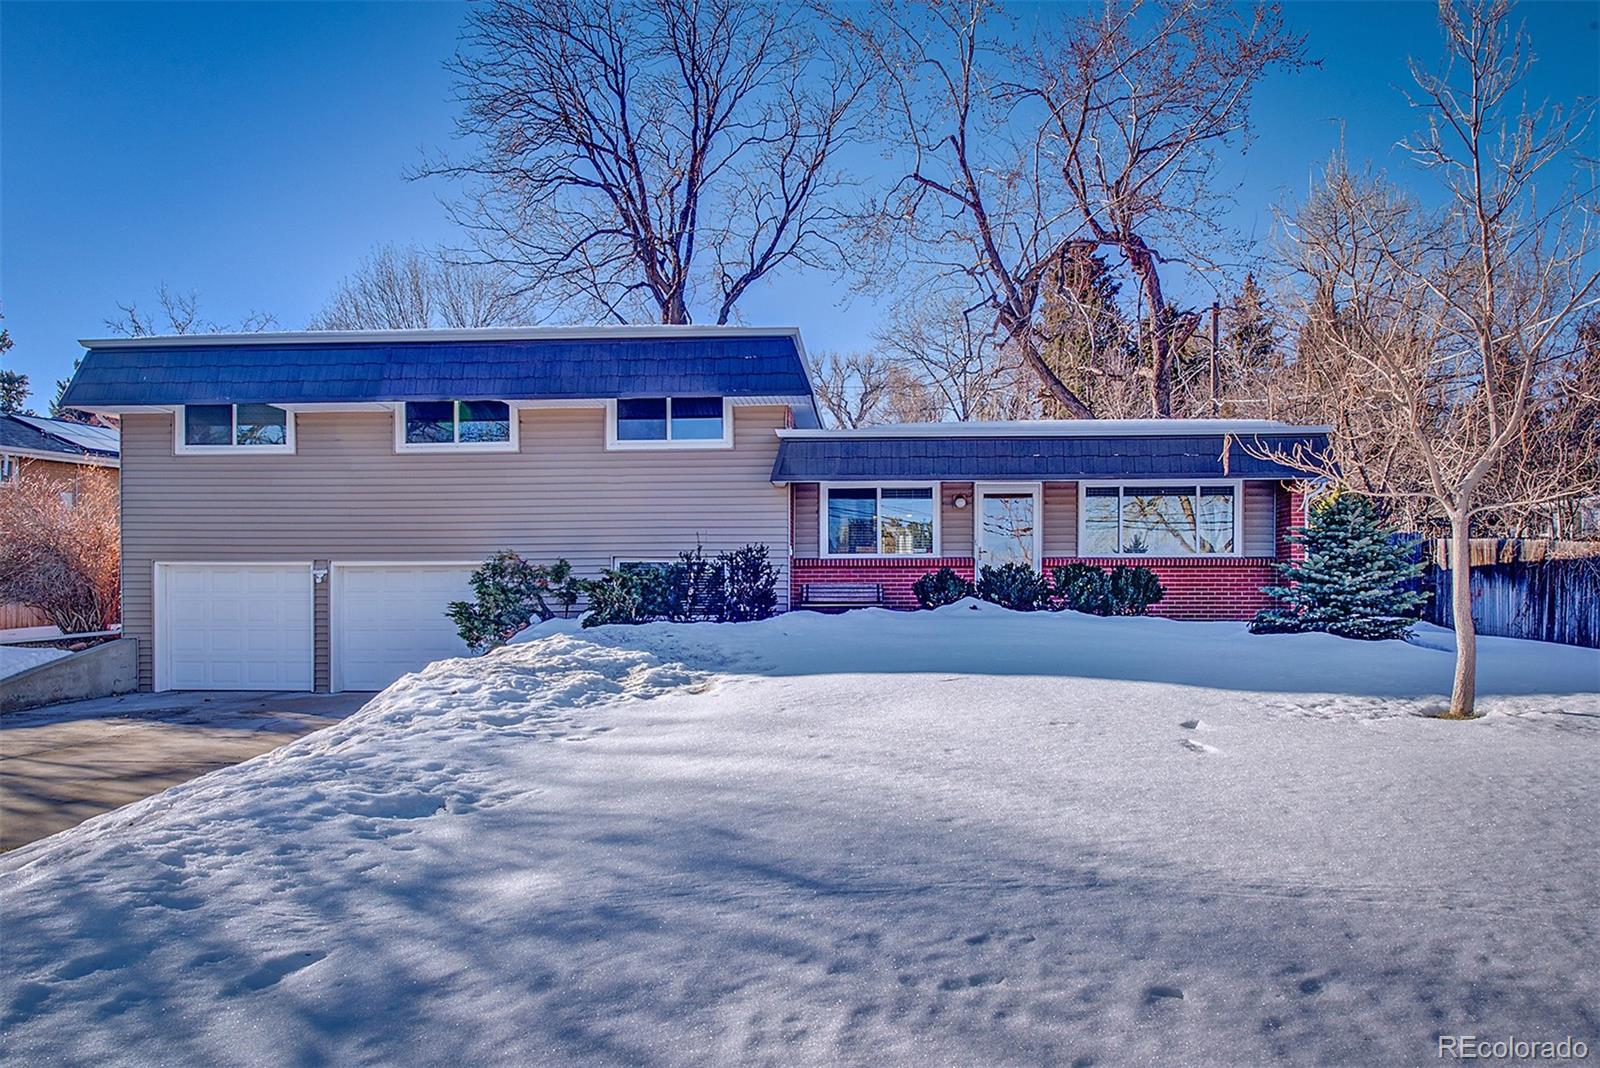 Report Image for 11500 W 26th Avenue,Lakewood, Colorado